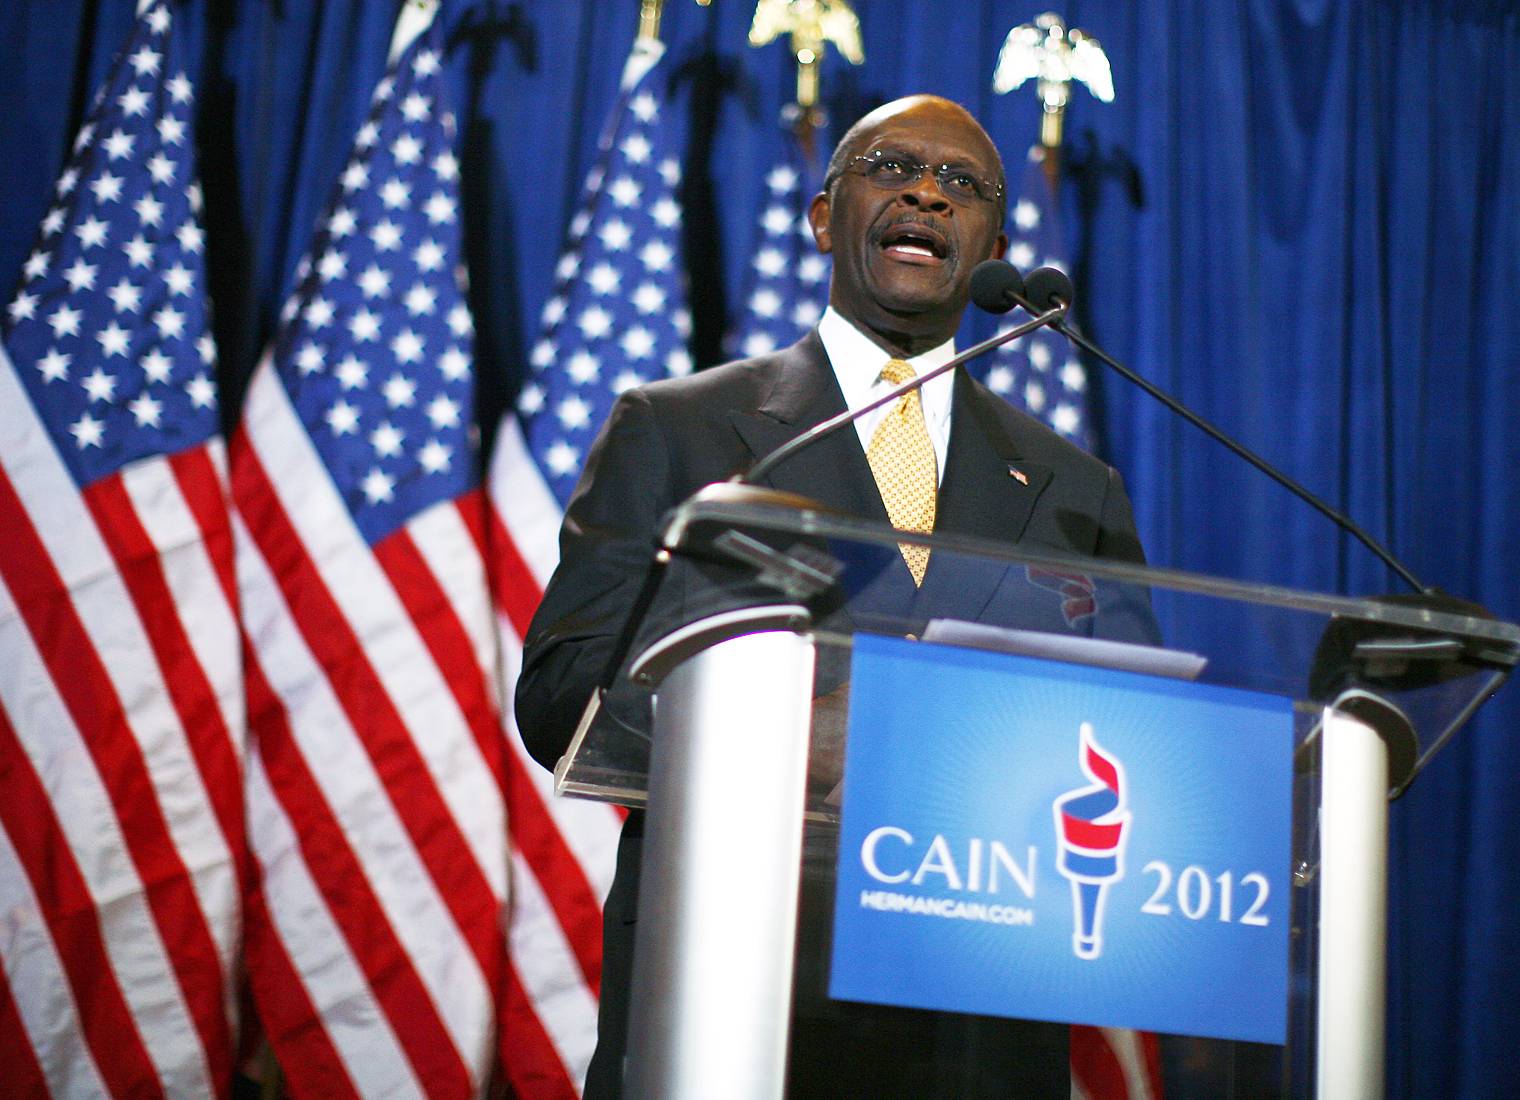 Herman Cain - “The fact is, these anonymous allegations are false and now the Democrat machine in America has brought forth a troubled woman to make false accusations, many which exceed common sense,” said Herman Cain during a press conference to discuss the sexual harassment claims made against him.(Photo: Eric Thayer/Getty Images)